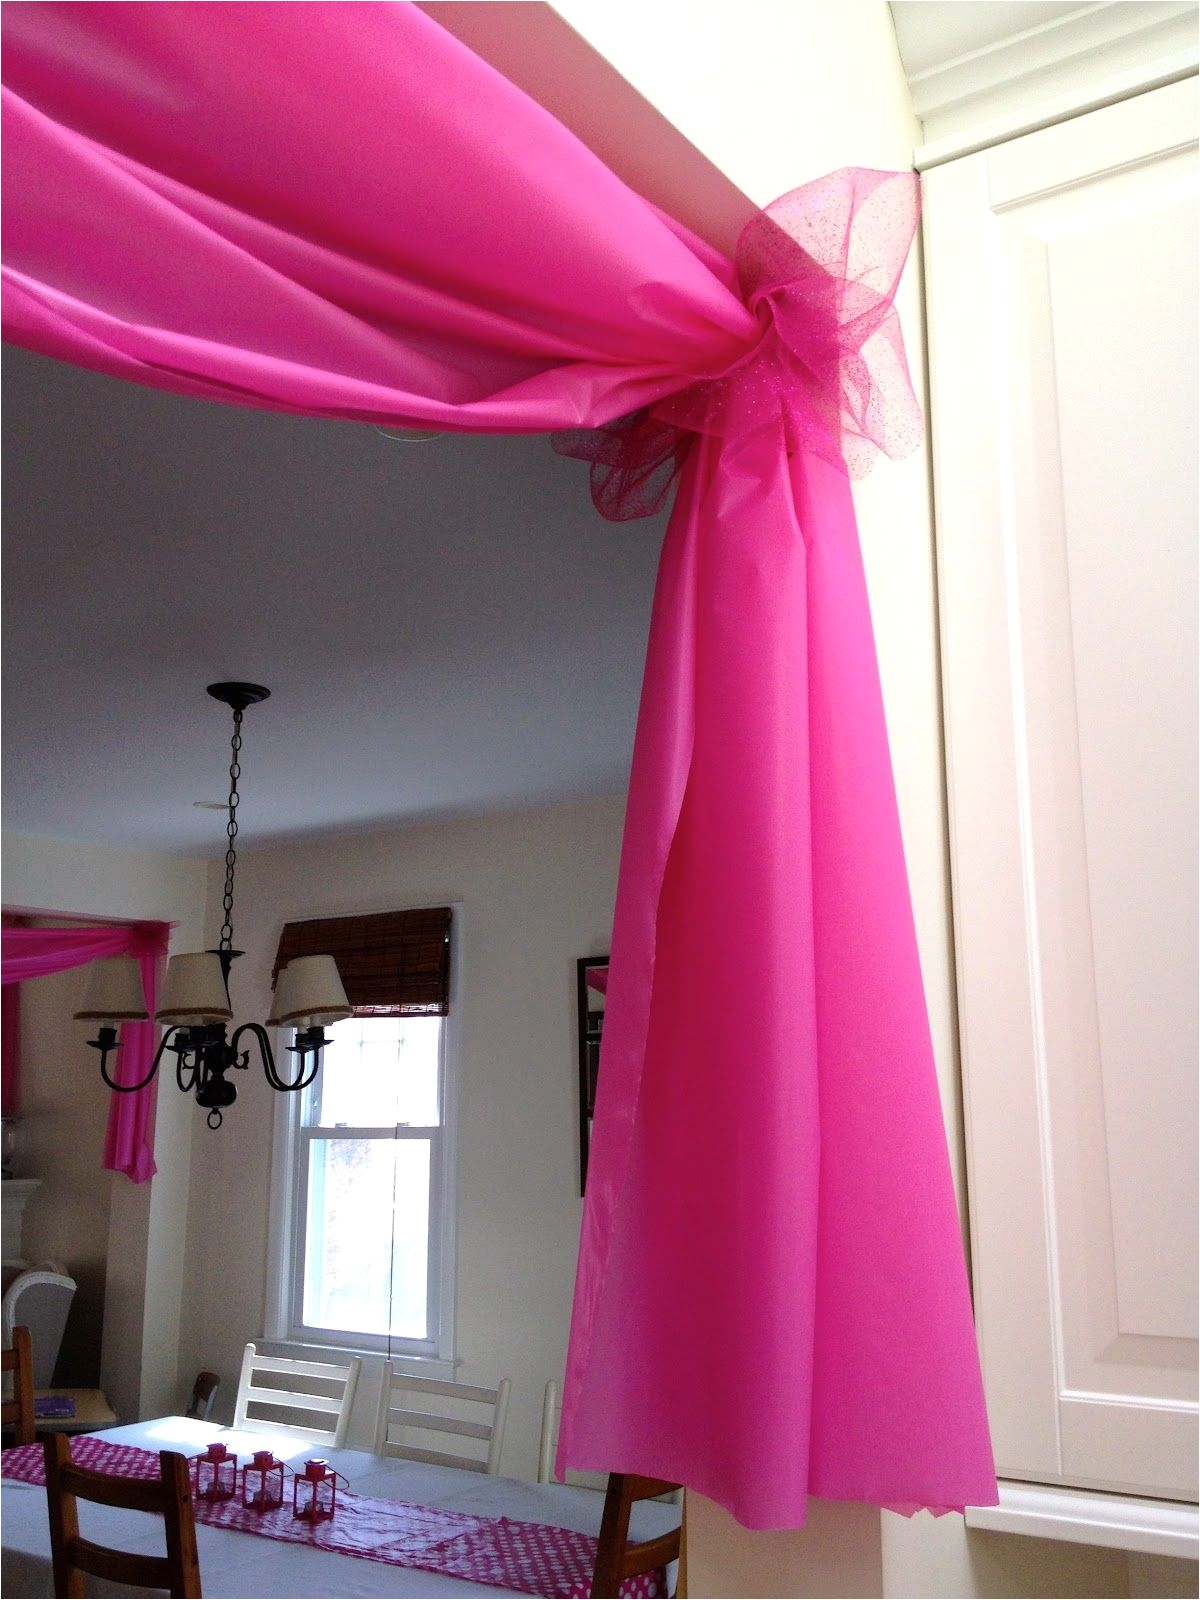 use 1 plastic tablecloths to decorate doorways and windows for parties etc wonderful idea how cute